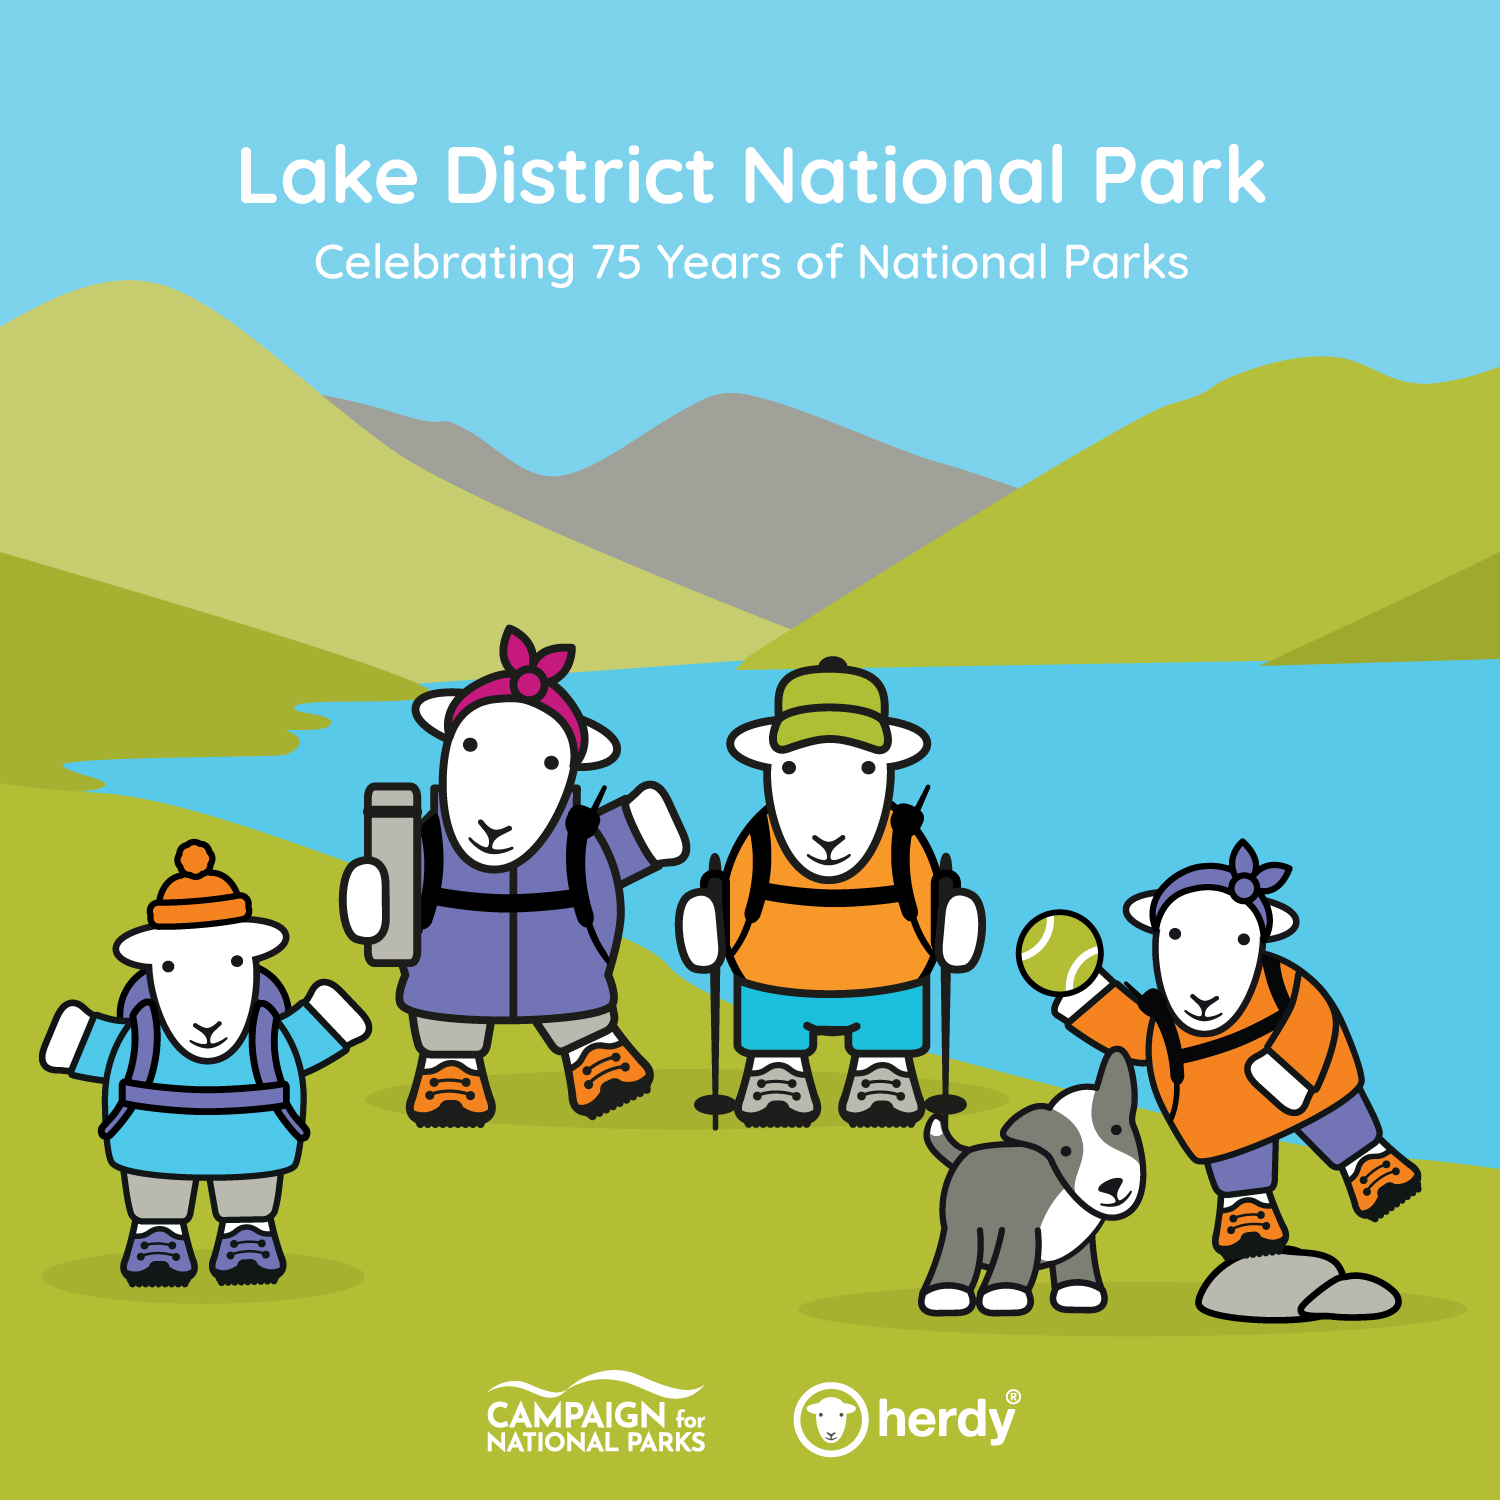 herdy in the Lake District National Park, celebrating 75 years of National Parks